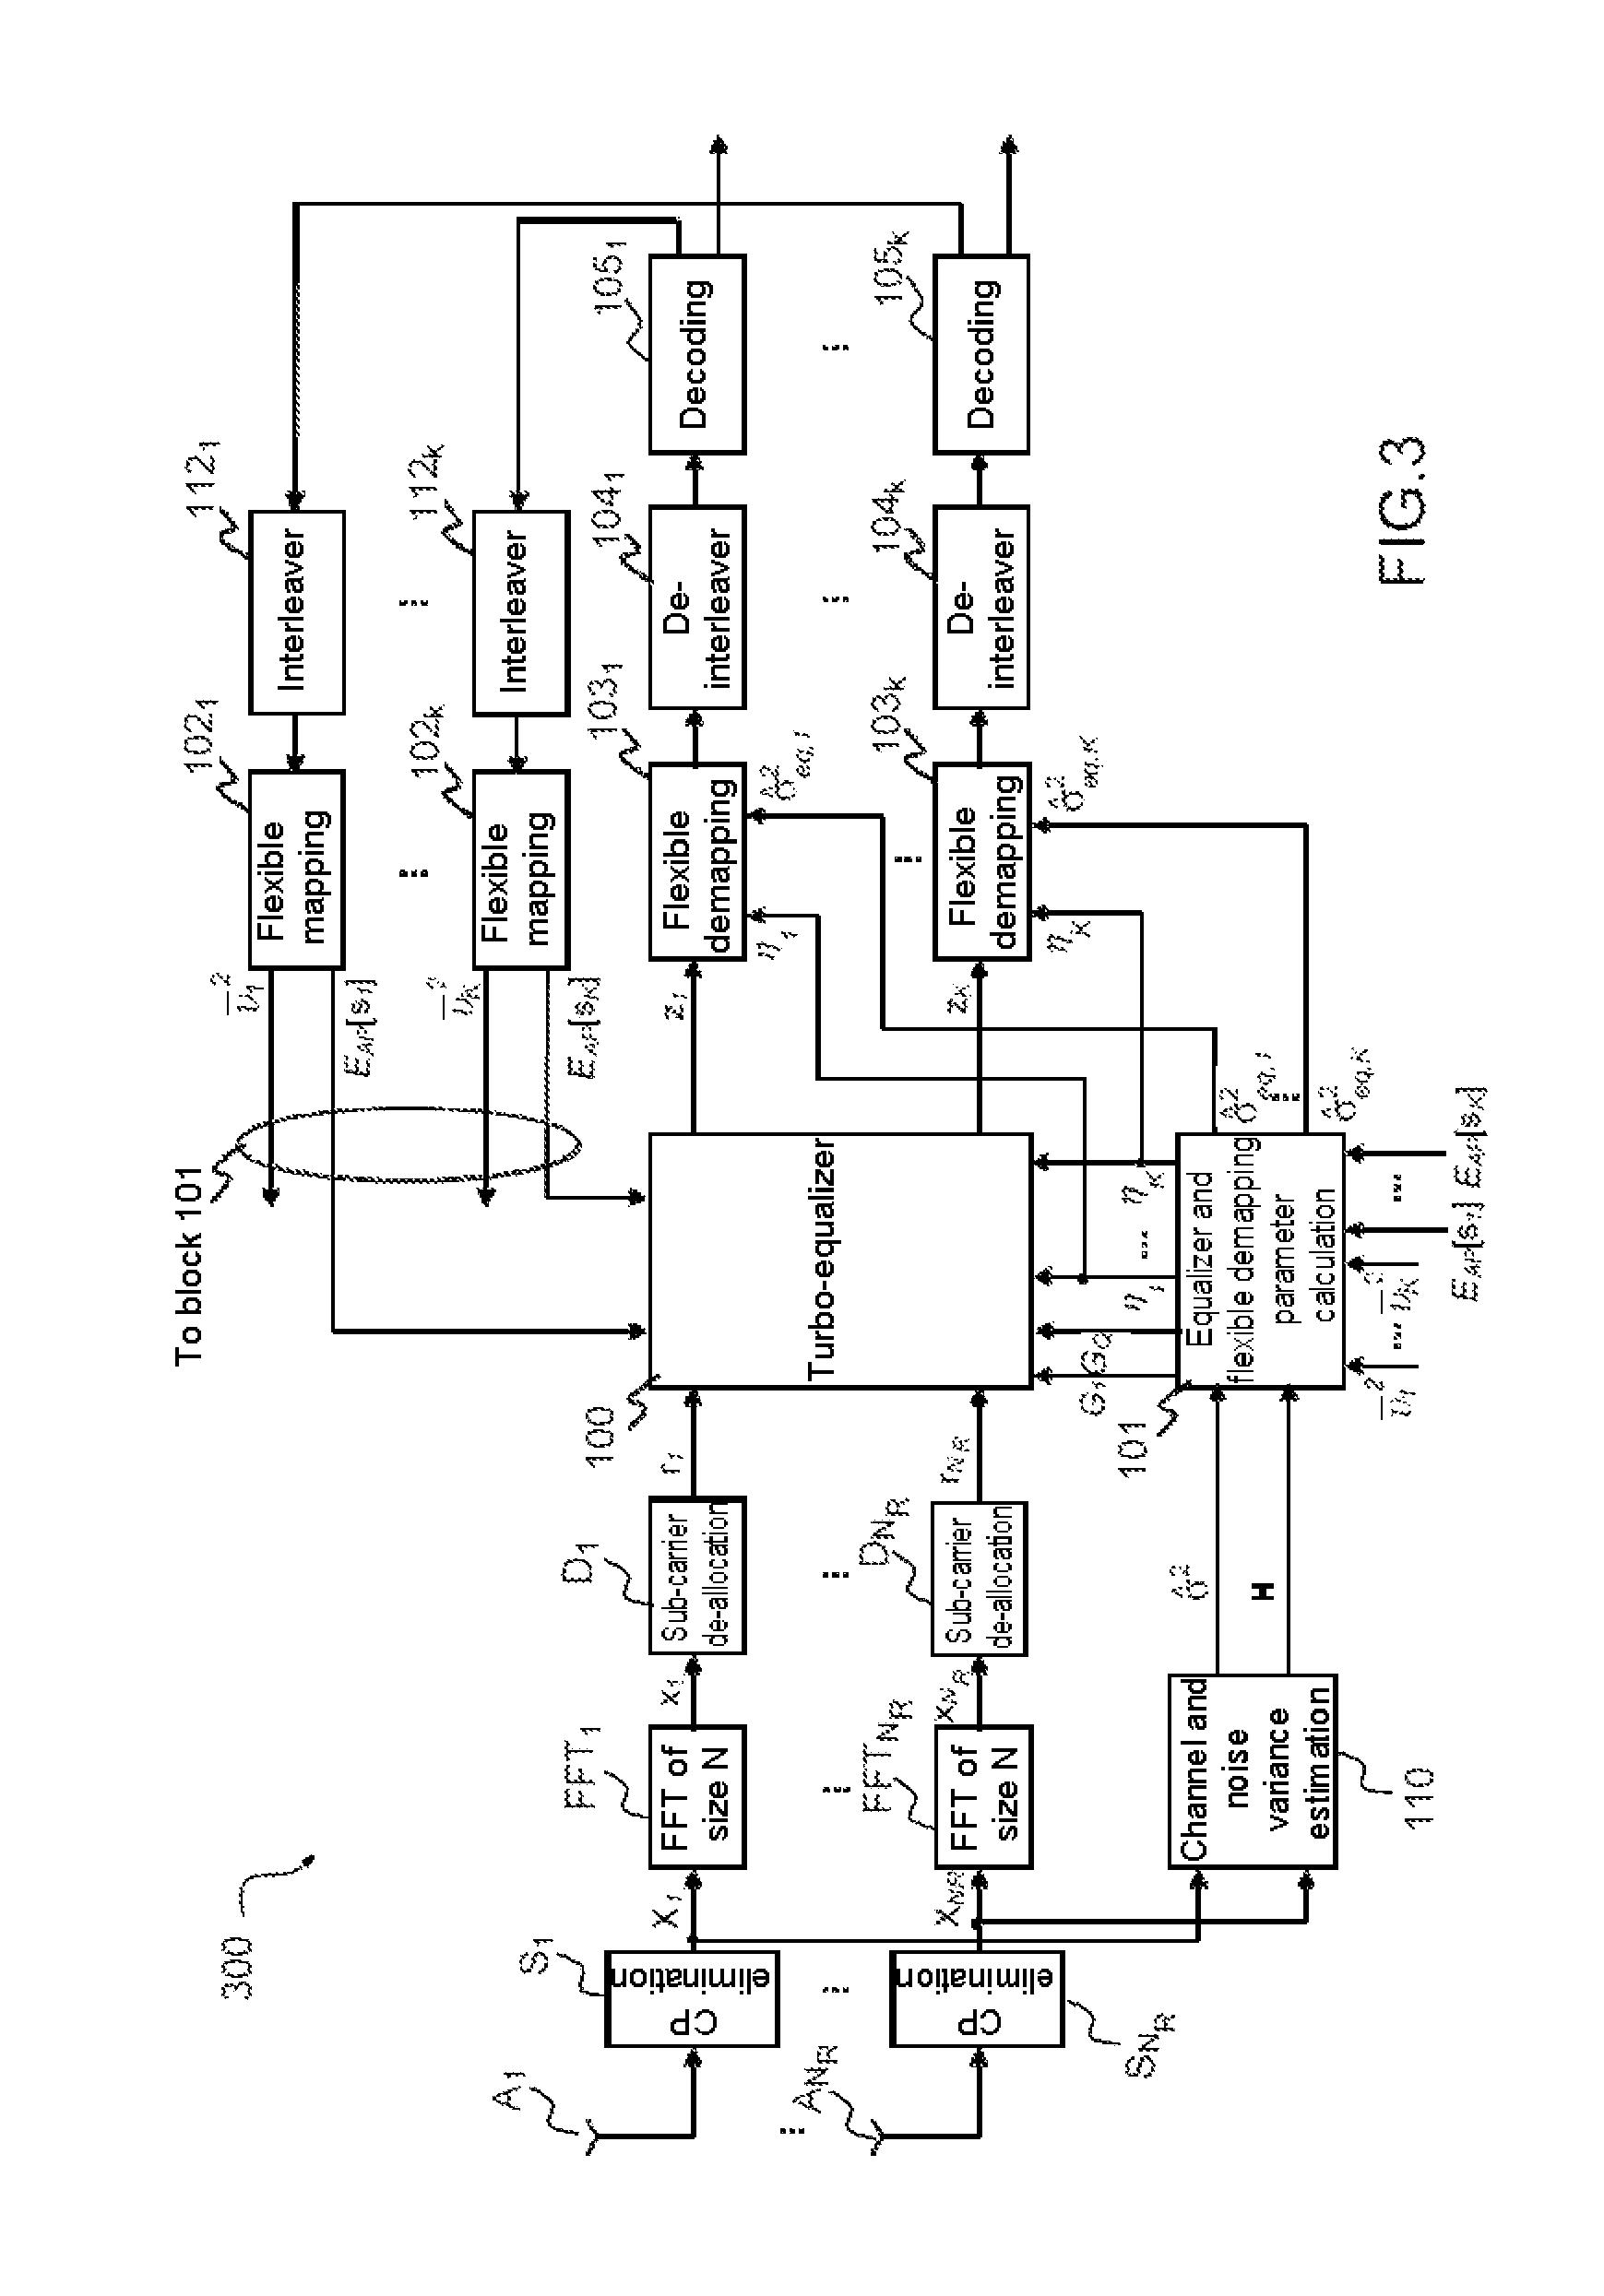 Method of widely linear turbo-equalization in a multi-user context and for a multi-channel multi-antenna receiver